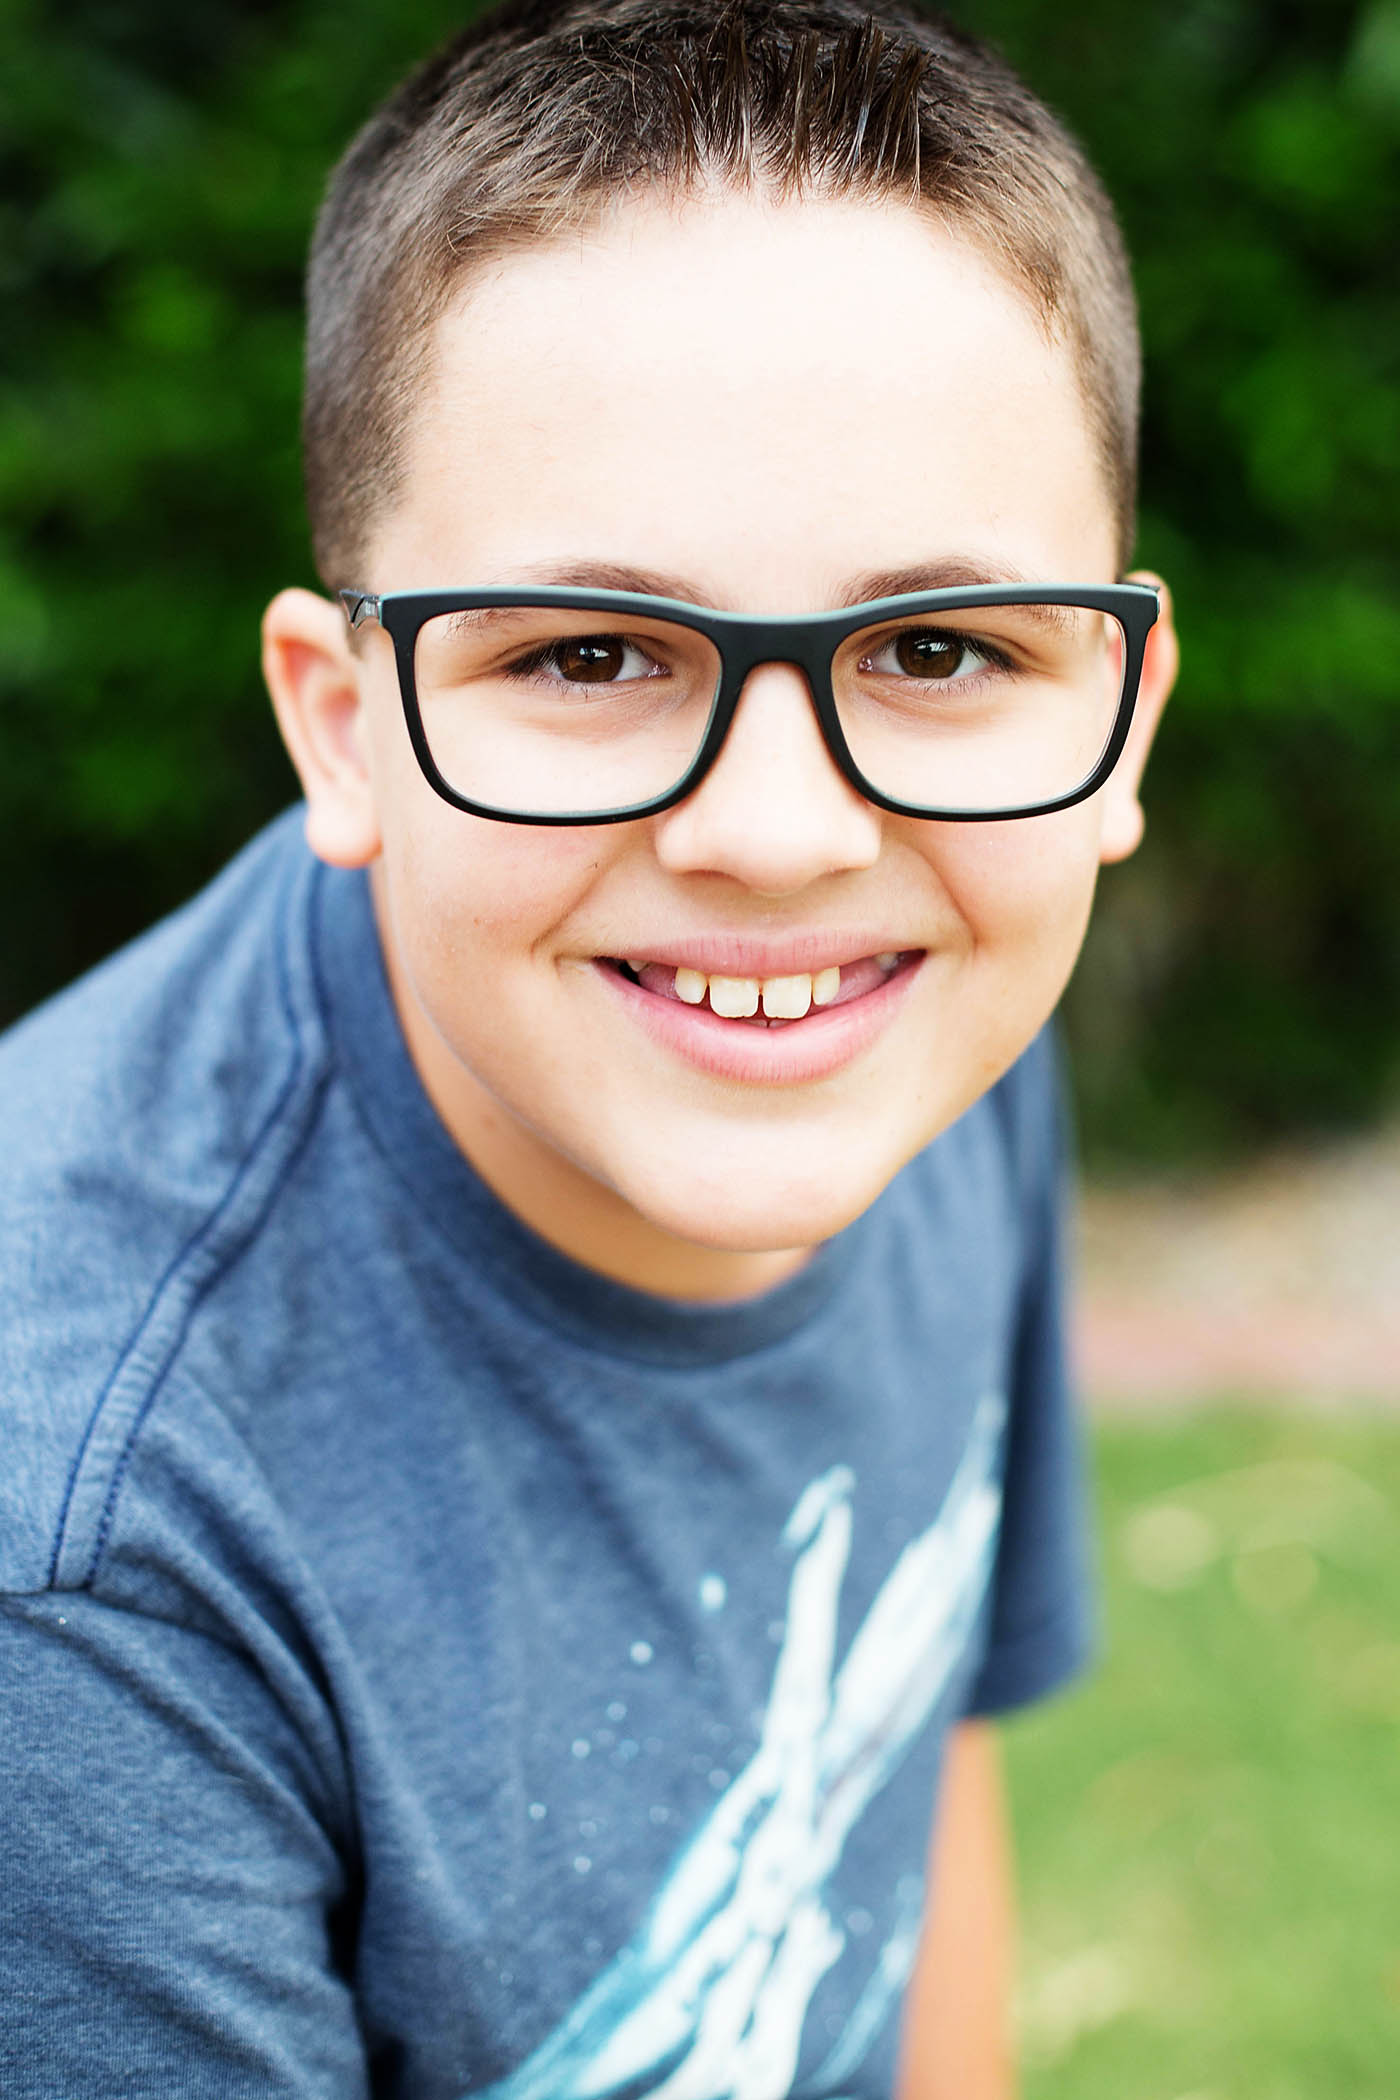 Pearle Vision has a great selection of glasses for teens!